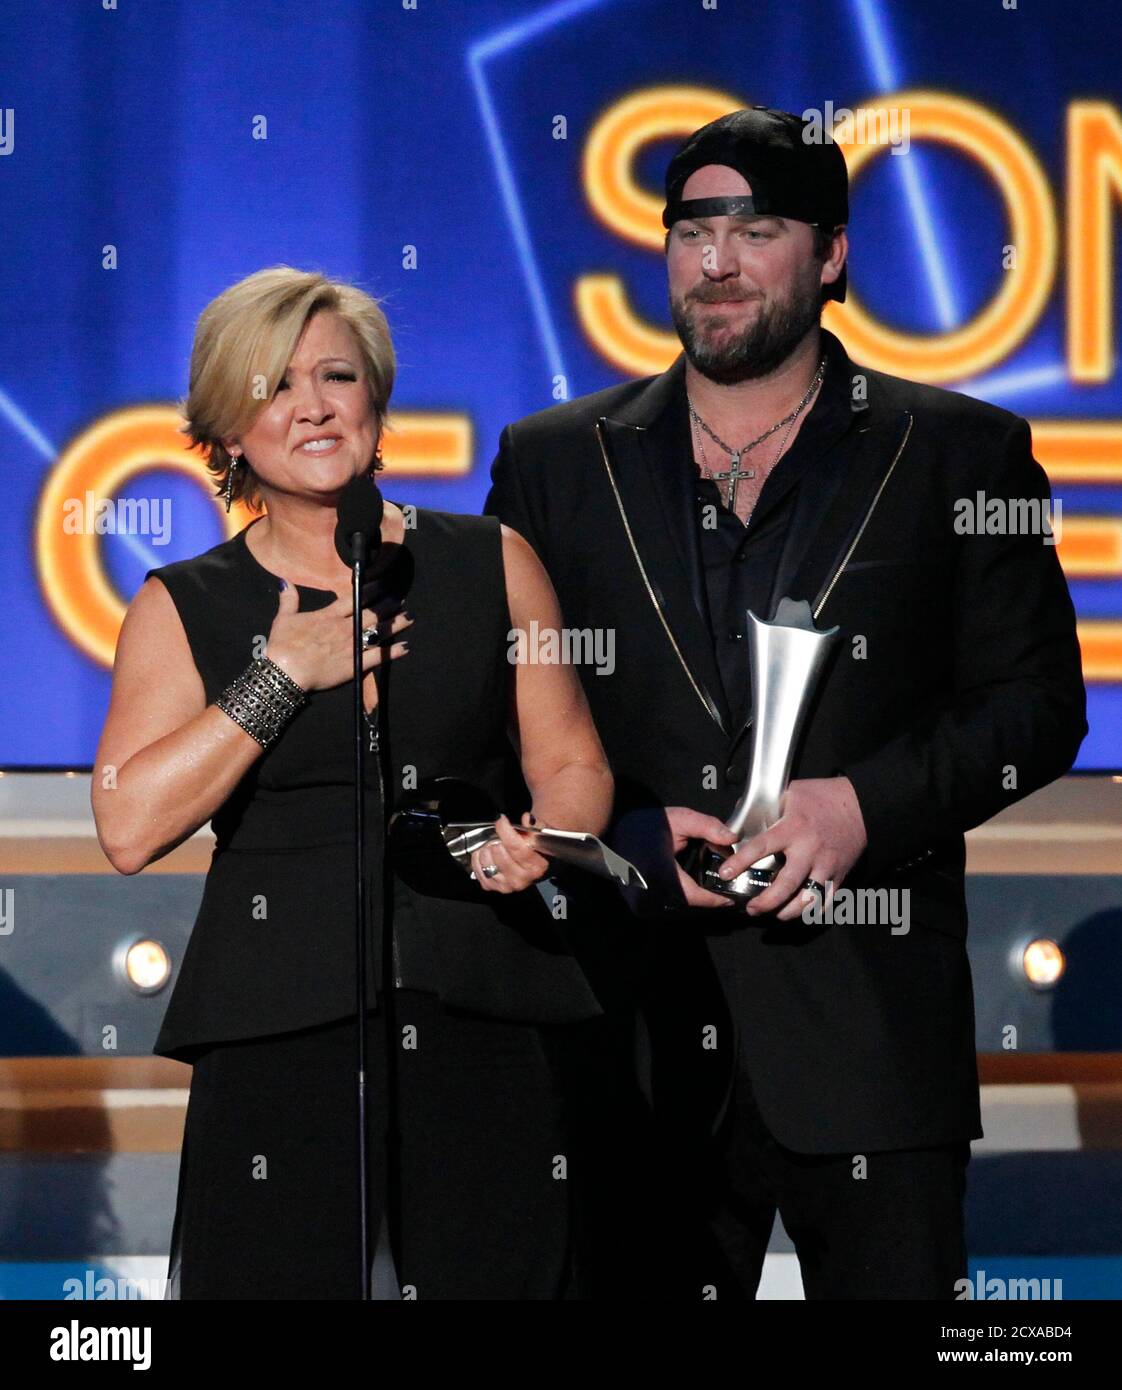 Country singer Lee Brice (R) and songwriter Connie Harrington accept the  award for song of the year for "I Drive Your Truck" at the 49th Annual  Academy of Country Music Awards in